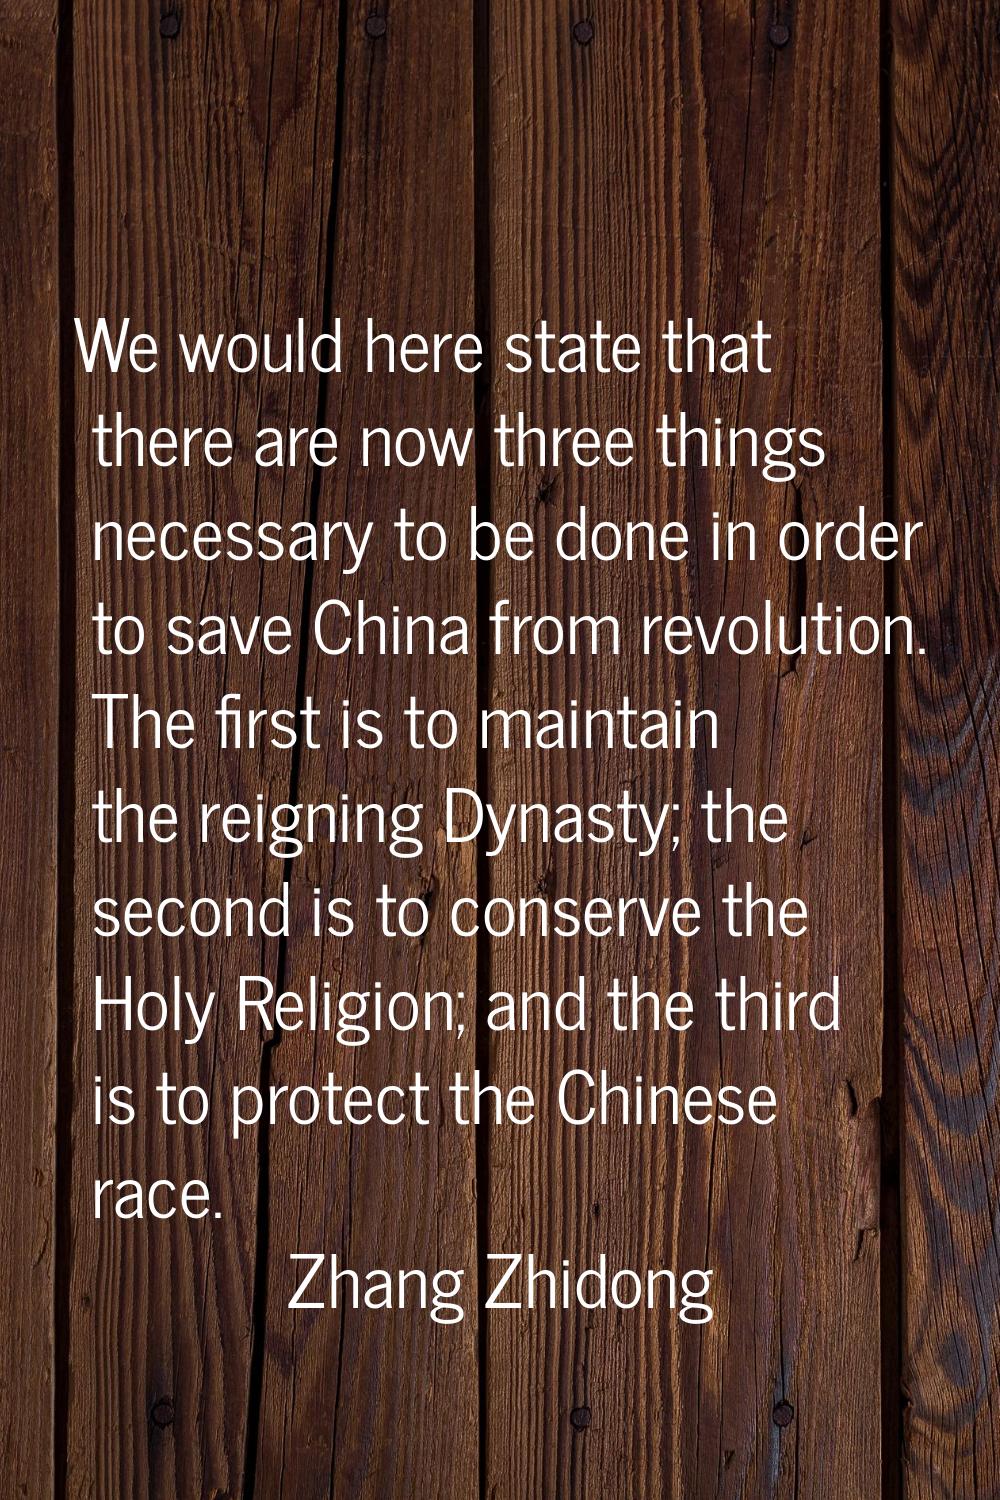 We would here state that there are now three things necessary to be done in order to save China fro